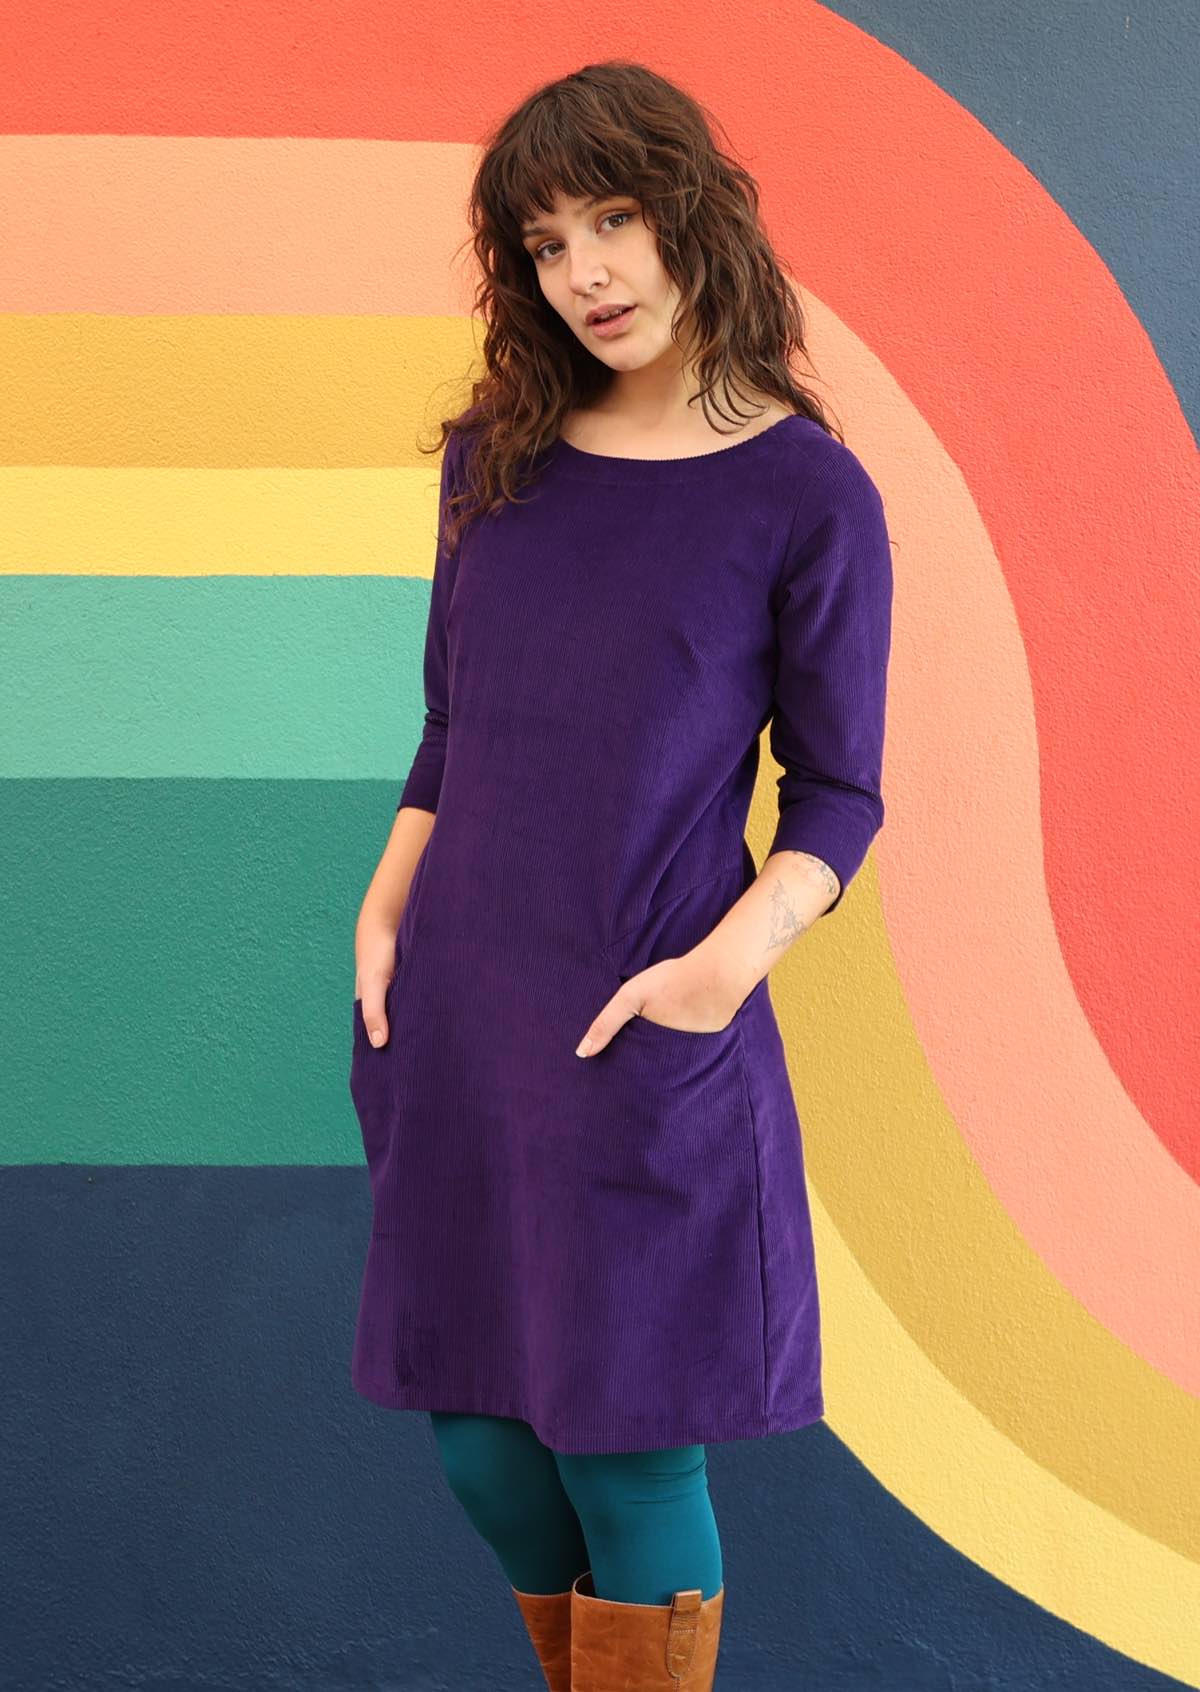 Corduroy dress in rich purple with pockets and side zip